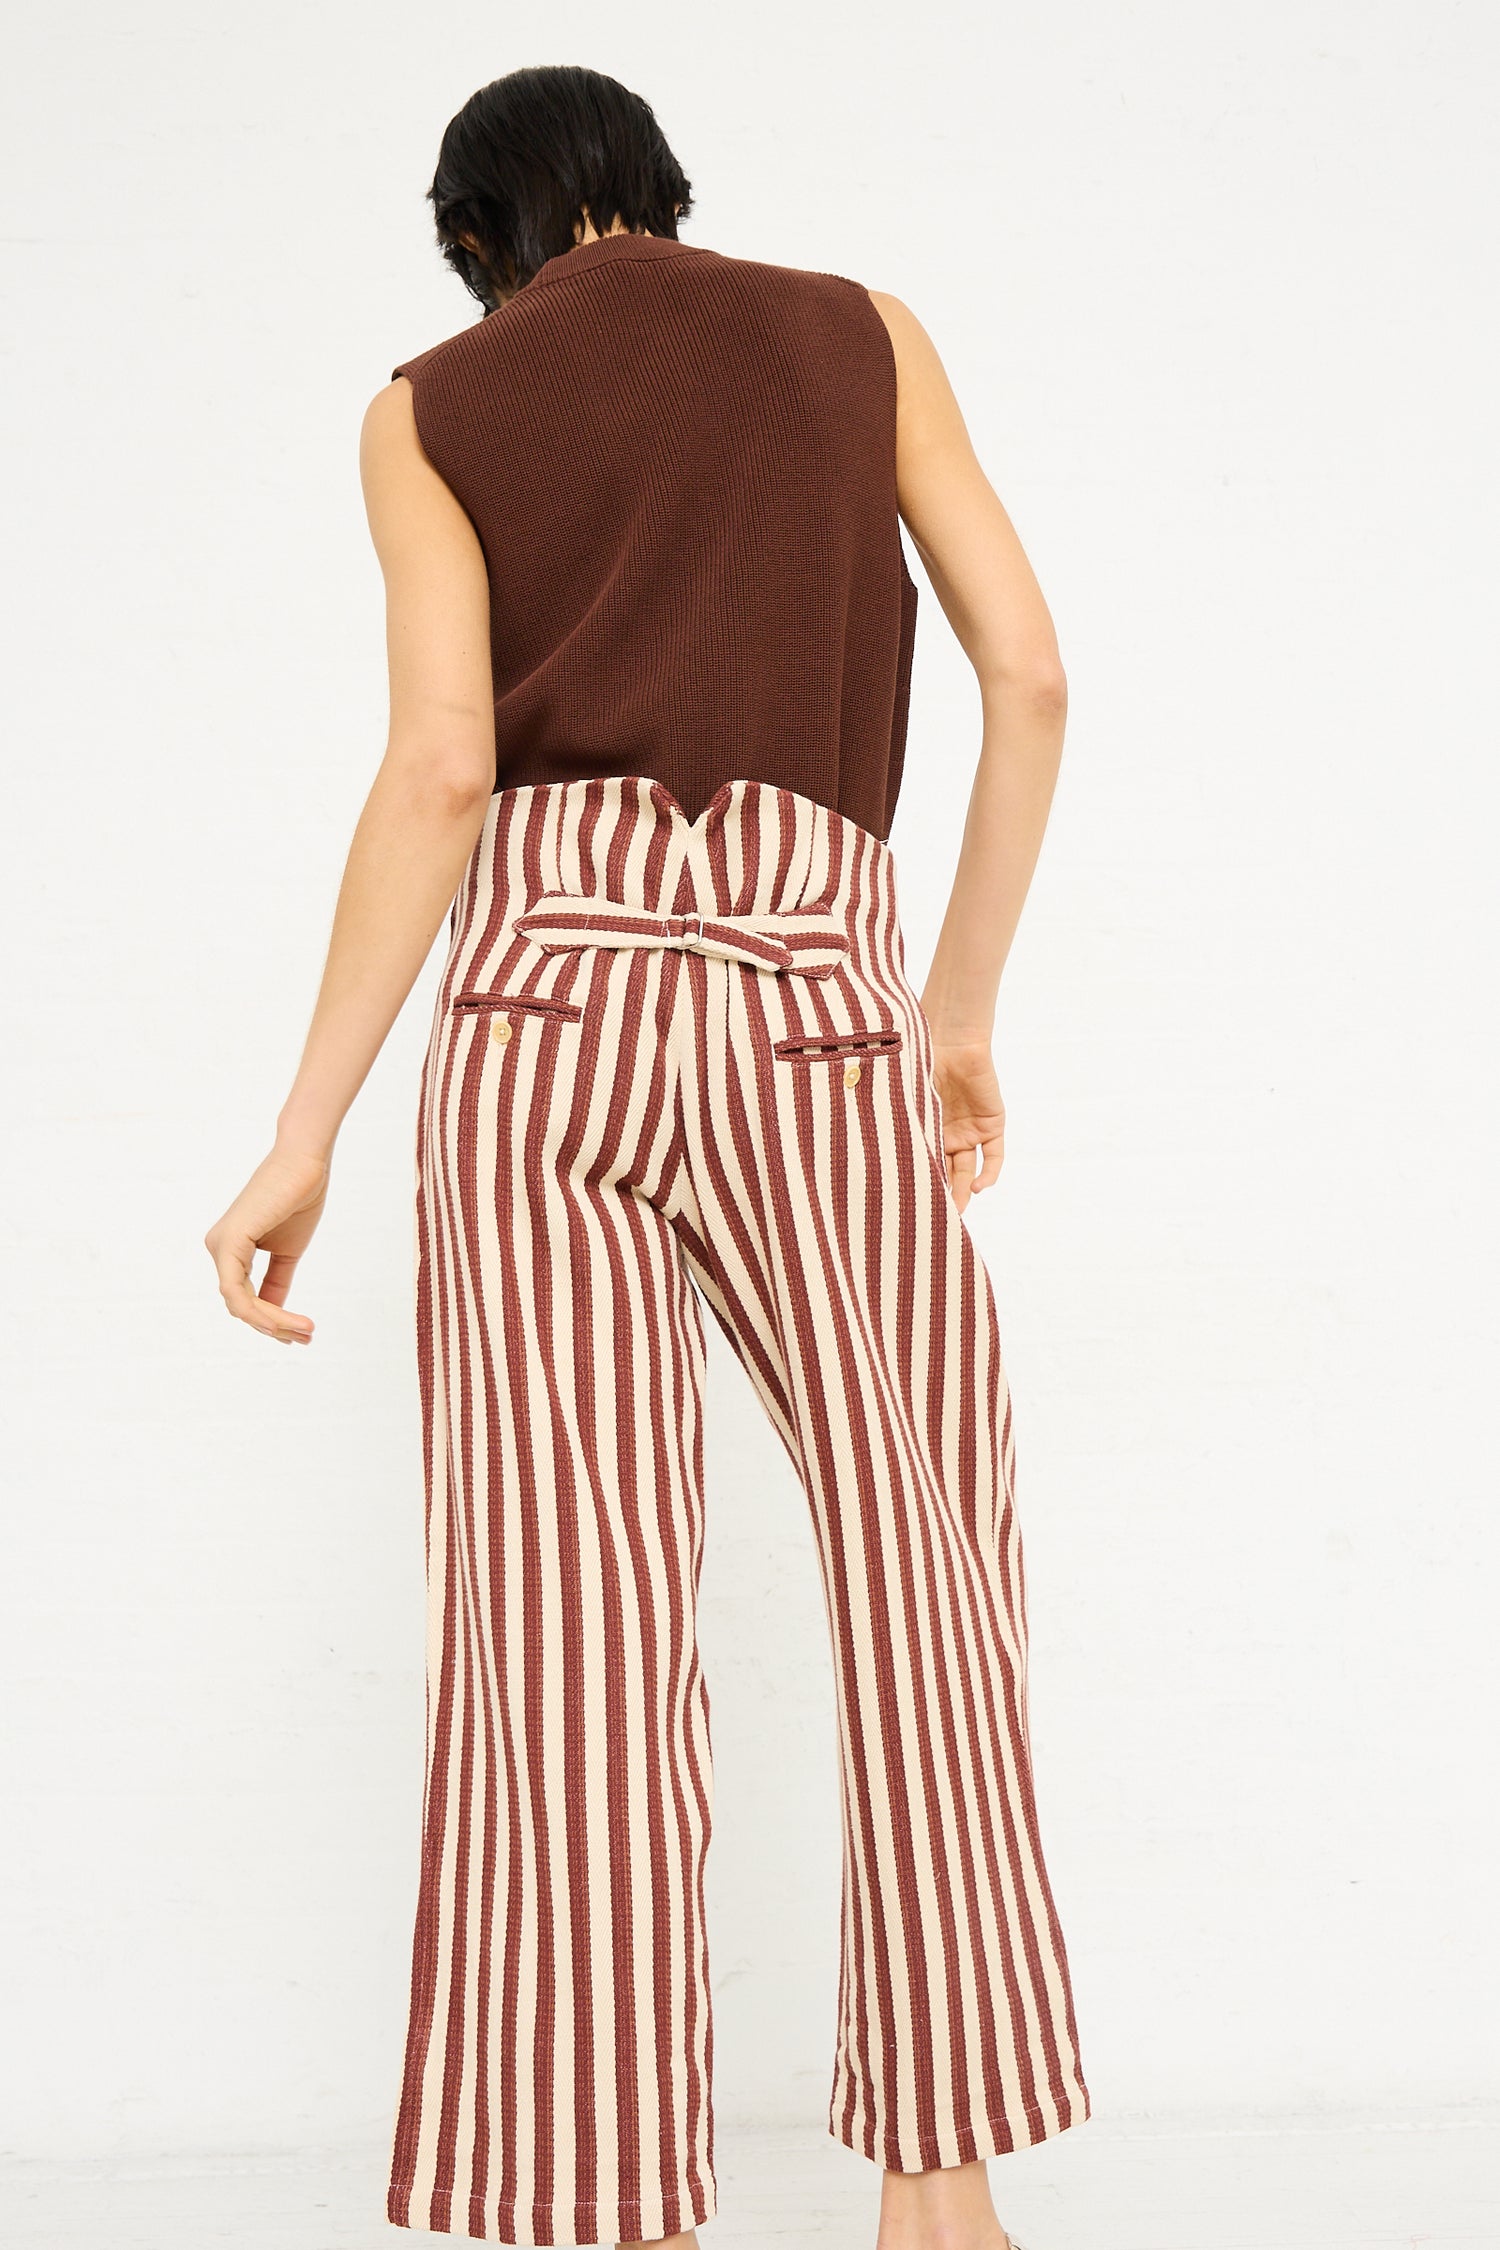 Woman standing with her back to the camera, wearing Caron Callahan's Dexter Pant in Auburn Stripe and a brown sleeveless top.